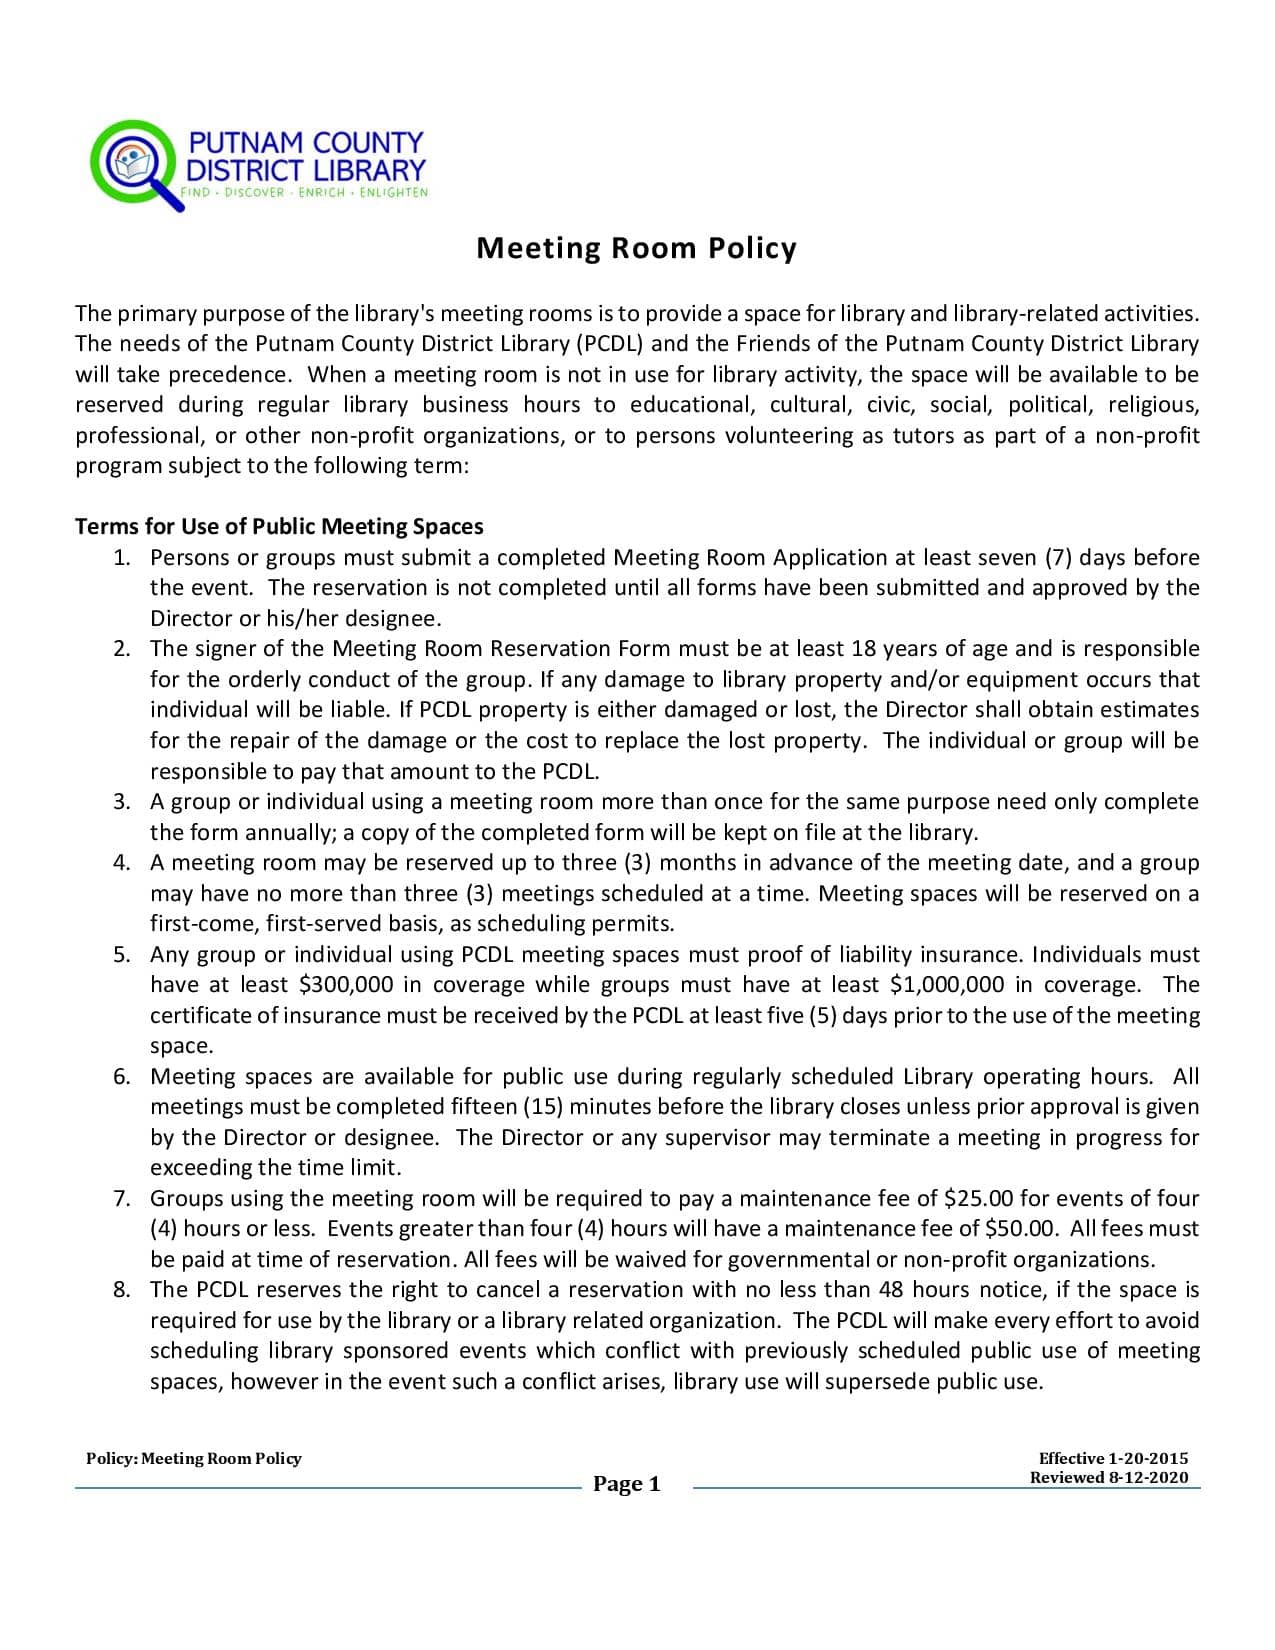 Meeting Room Policy page 1